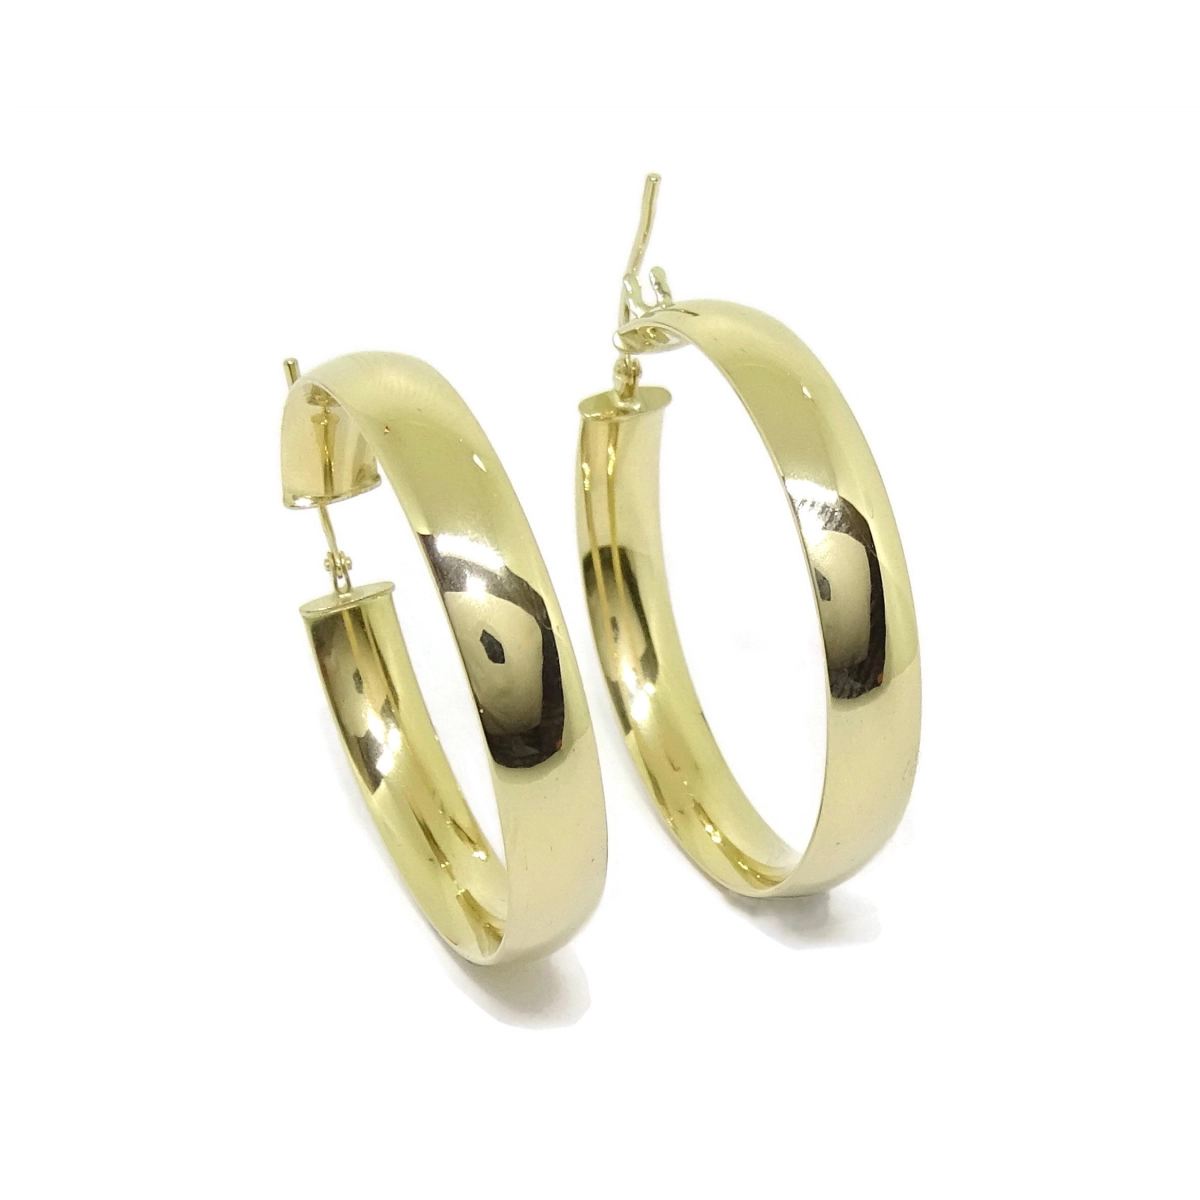 EARRINGS HOOPS LARGE 18K YELLOW GOLD 6MM WIDE AND 3.4 CM DI�METRO OUTSIDE. NEVER SAY NEVER